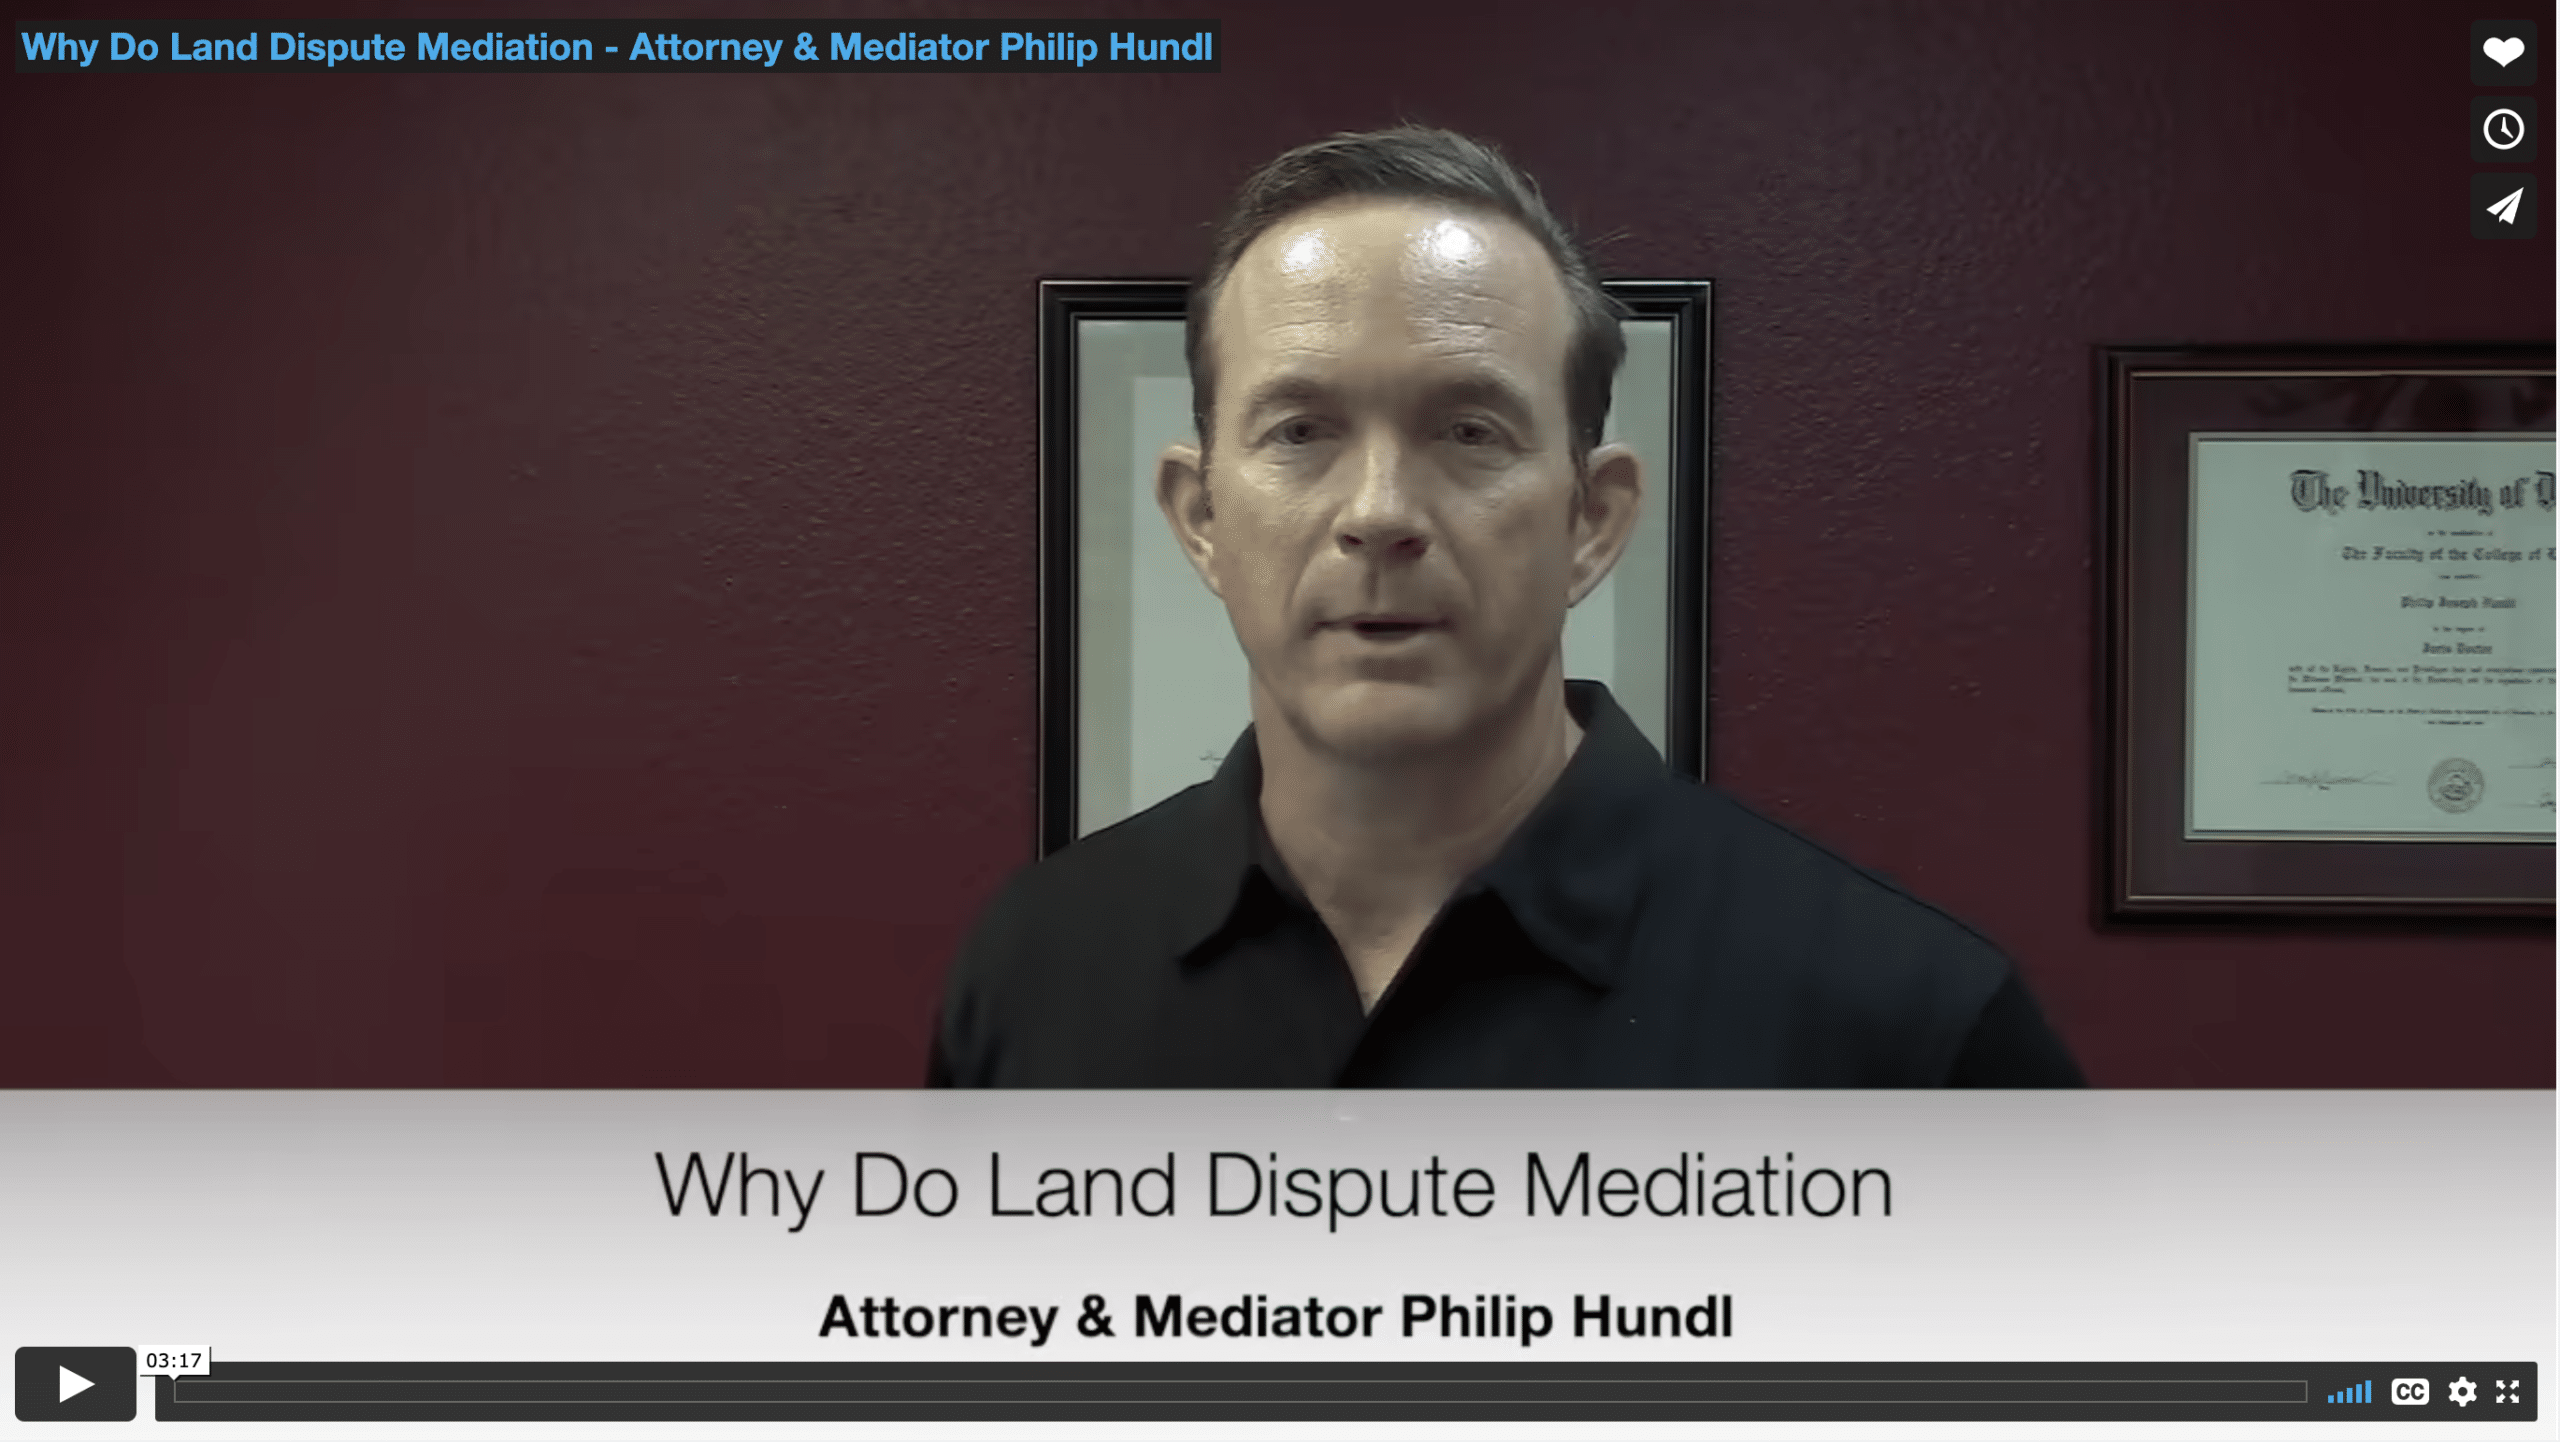 Why Do Land Dispute Mediation